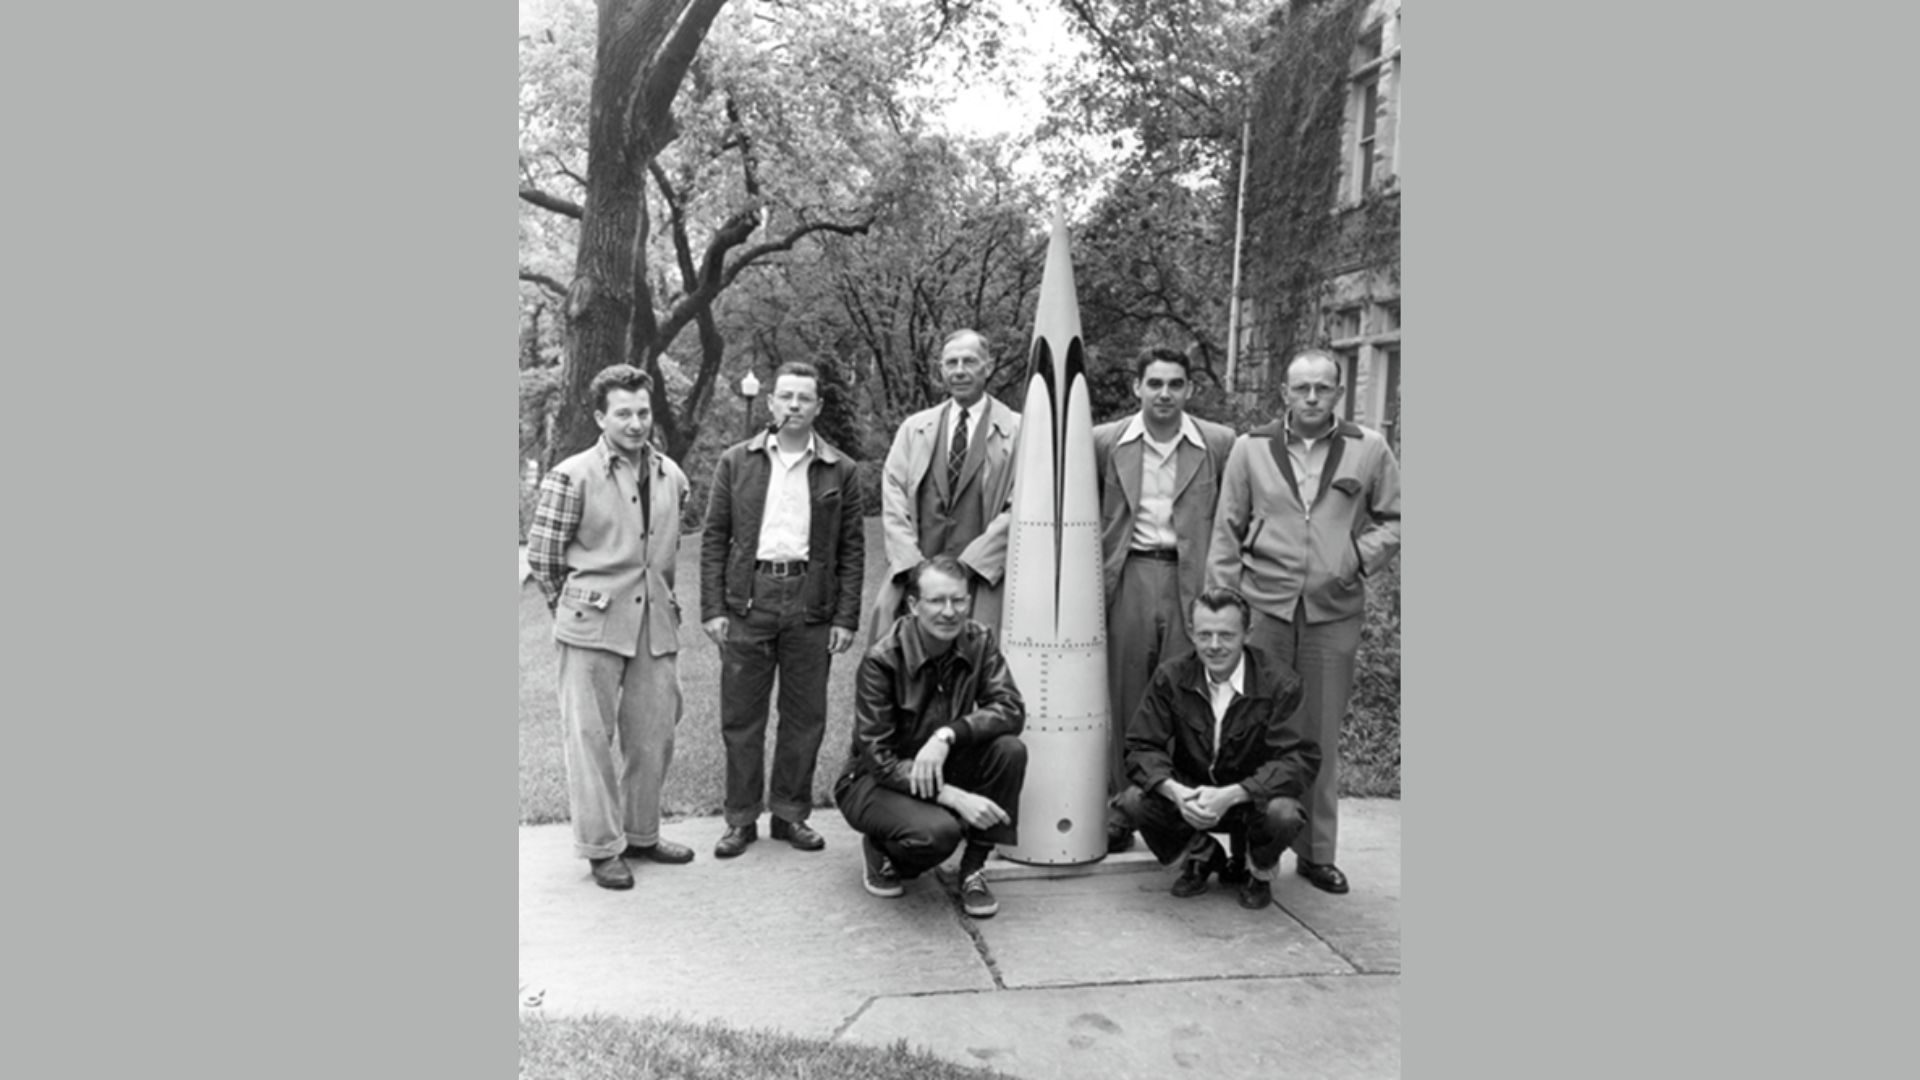 Some of the founding members of the Upper Air Laboratory at CU (UAL, now CU/LASP) and an ogive that was produced for the two unknown scientists standing at the far right. The tripod base contains and supports a turntable that could simulate a an Aerobee’s spin- stabilzed fuselage. And the base of the ogive contains the despin motor that would compensate for the Aerobee’s rotation. Credit: LASP/Ball